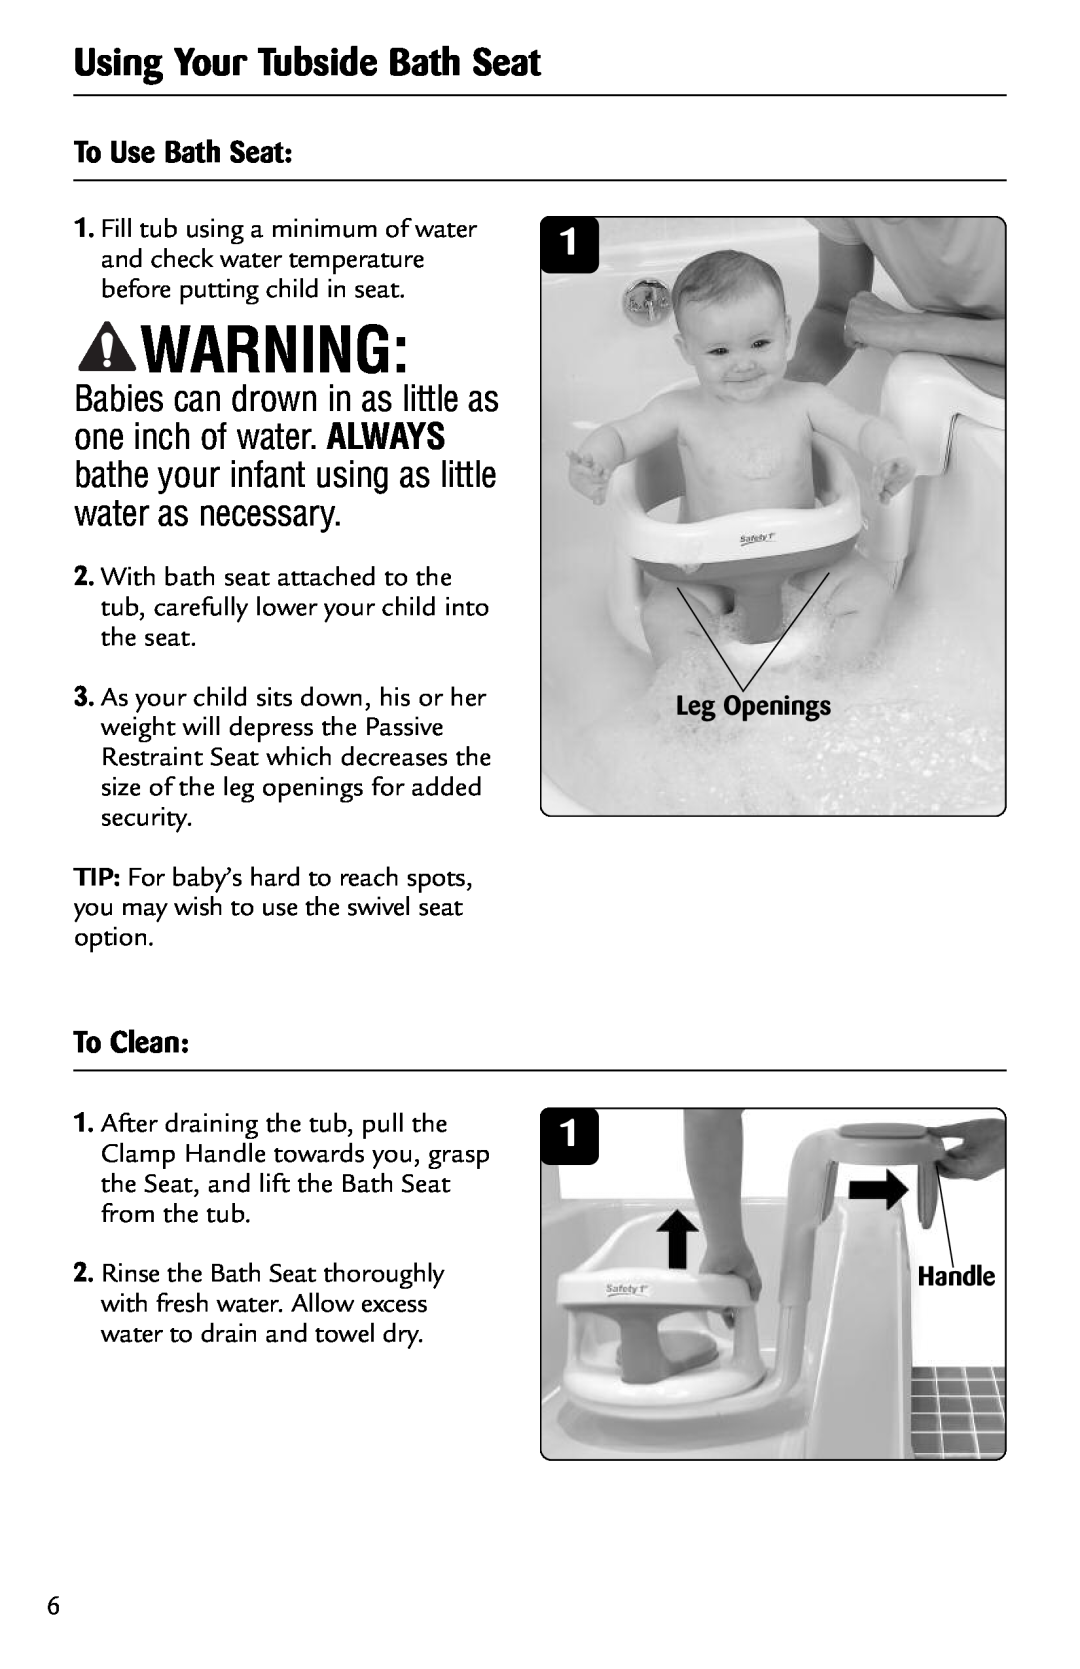 Safety 1st 44301A Using Your Tubside Bath Seat, one inch of water. ALWAYS, bathe your infant using as little, To Clean 